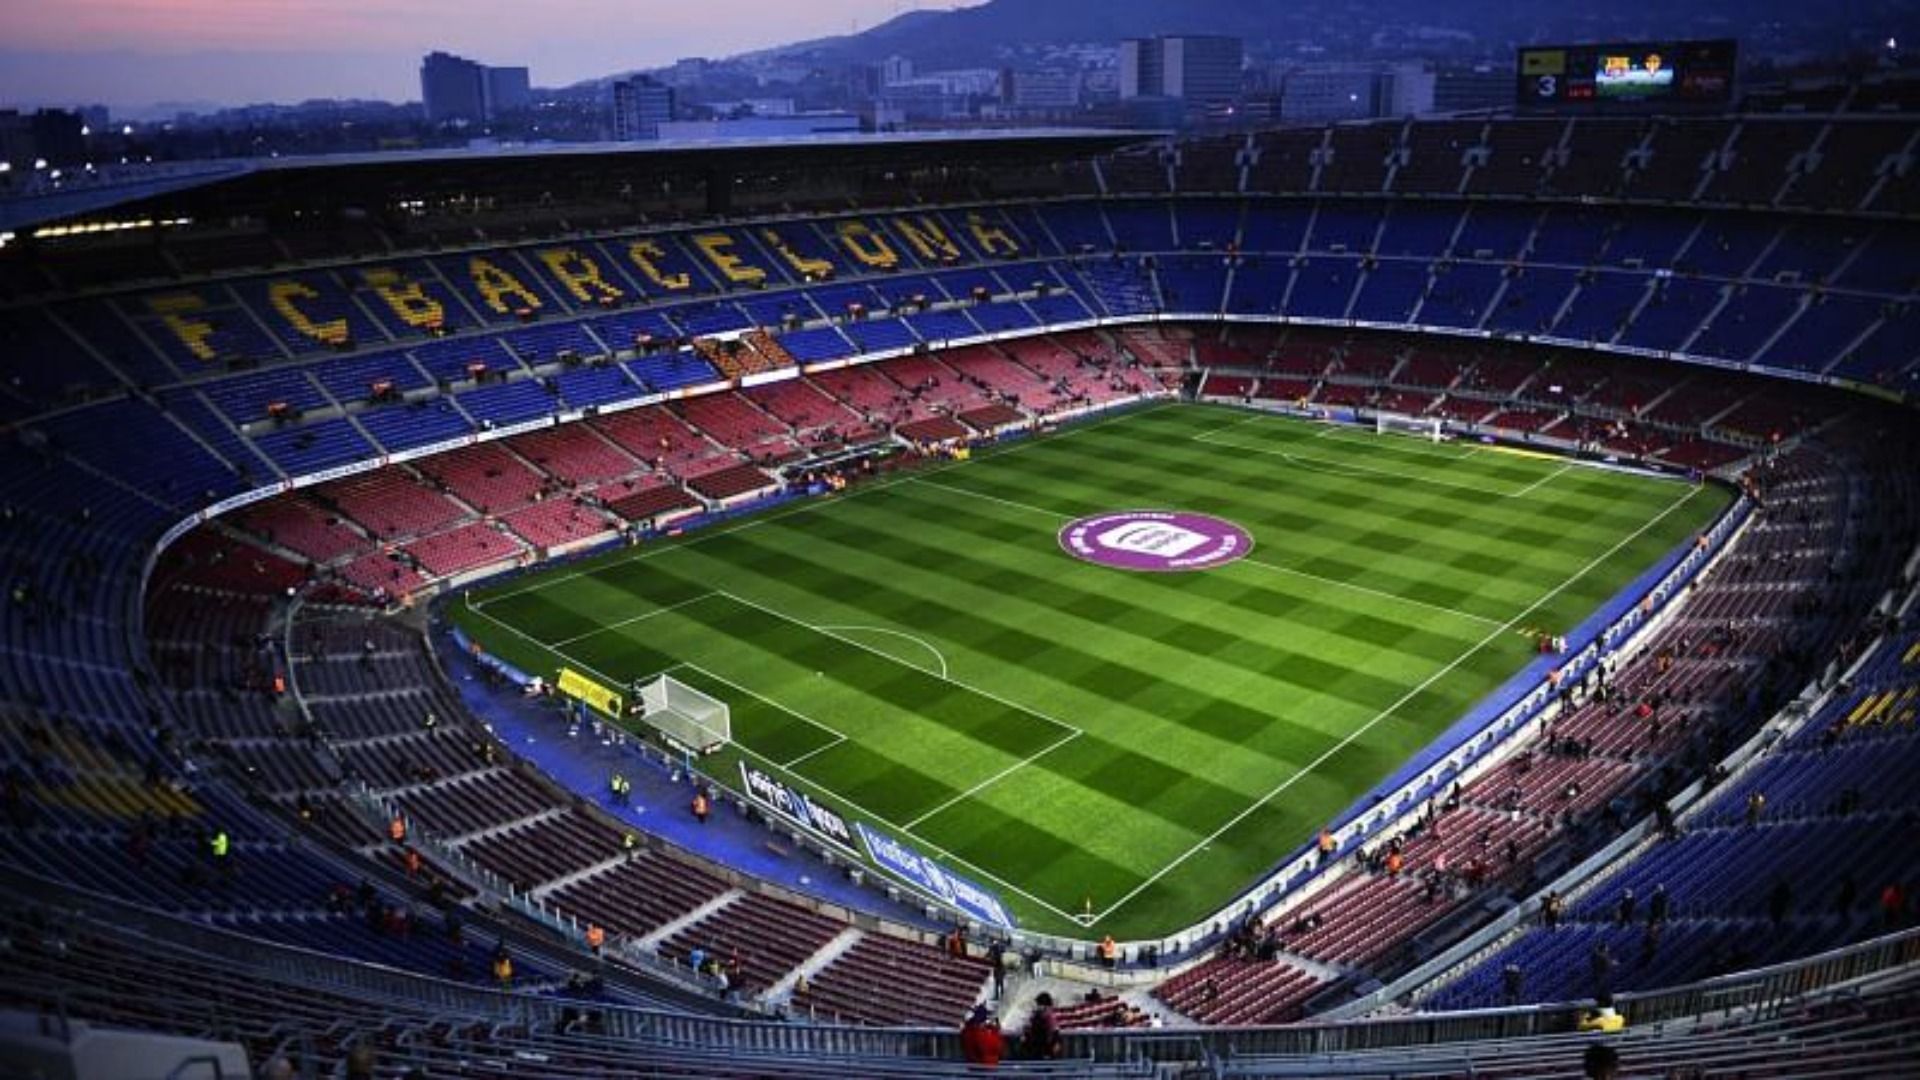 The Spotify Camp Nou is one of the most iconic stadiums.